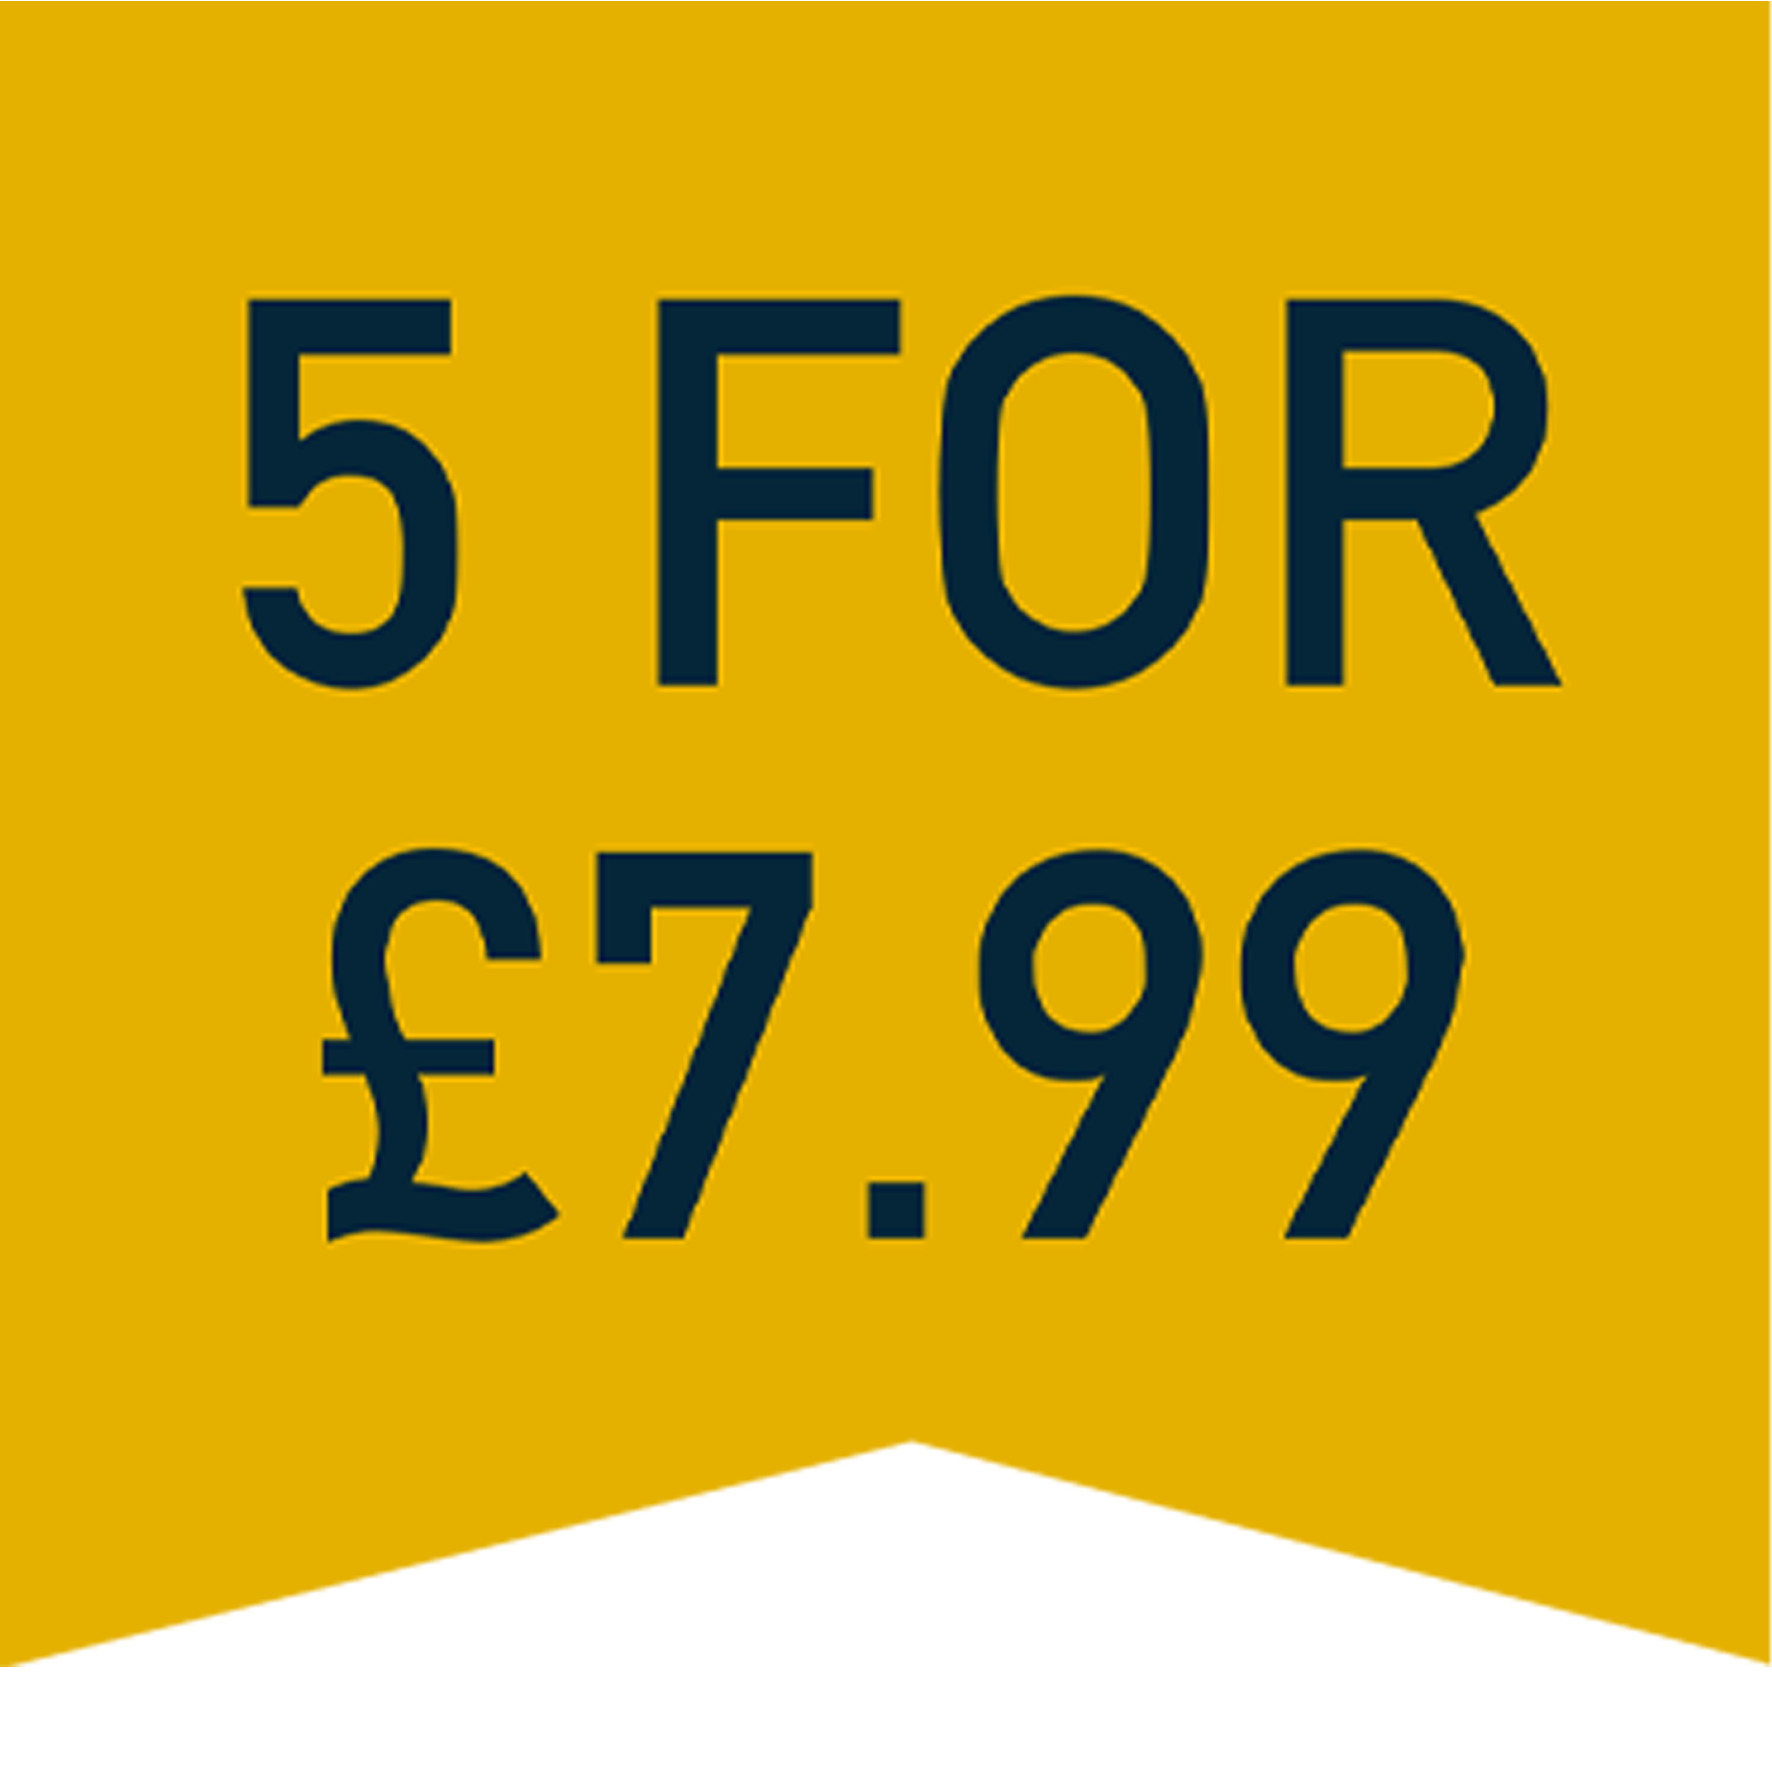 5 for £7.99